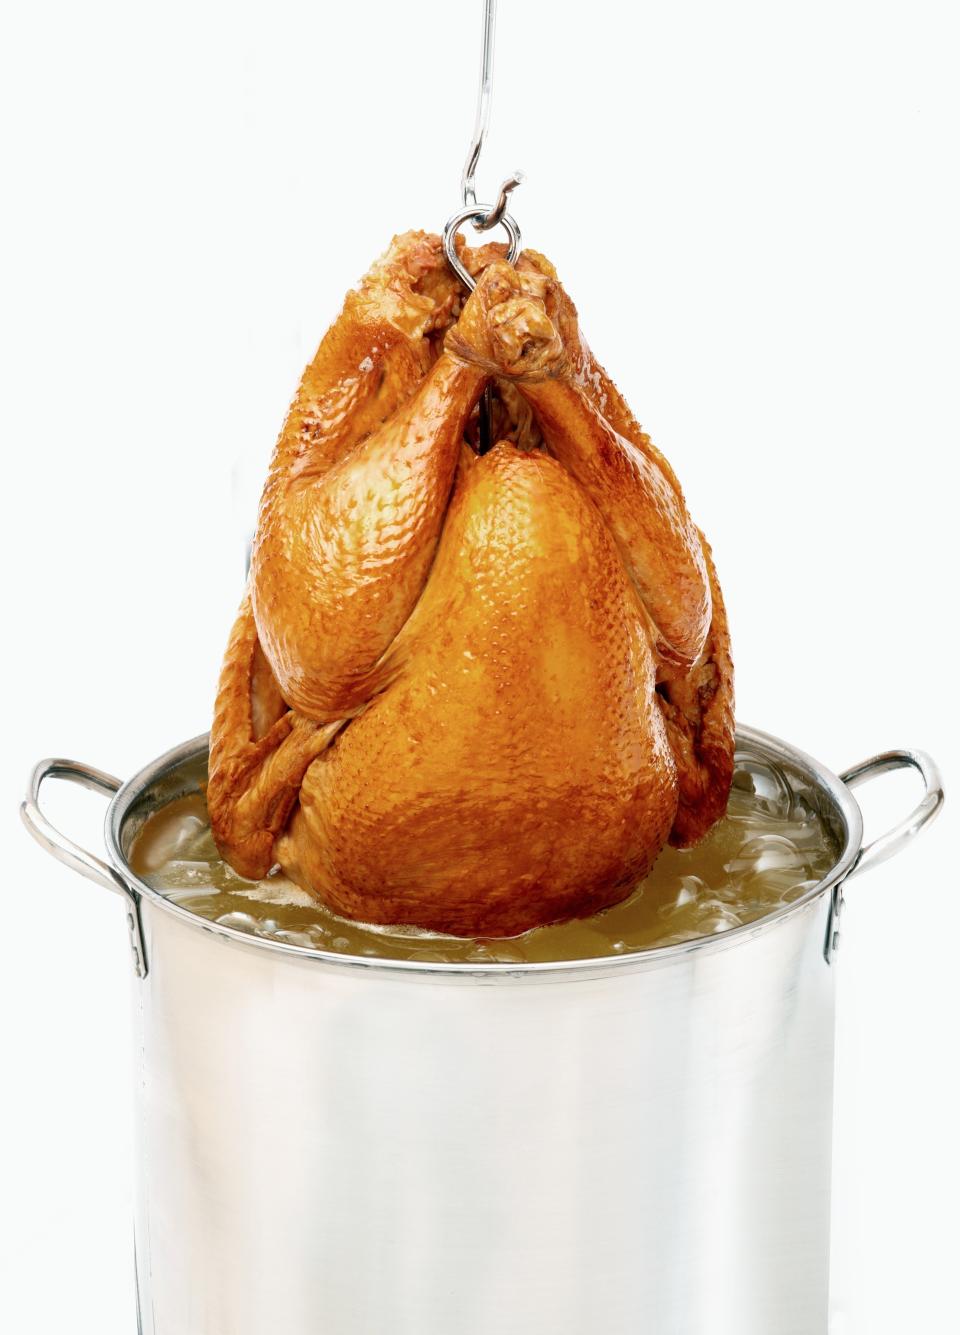 According to theperfectturkey.com: "A deep fried turkey takes about 3 to 5 minutes per pound when cooked in 350 degree F oil."